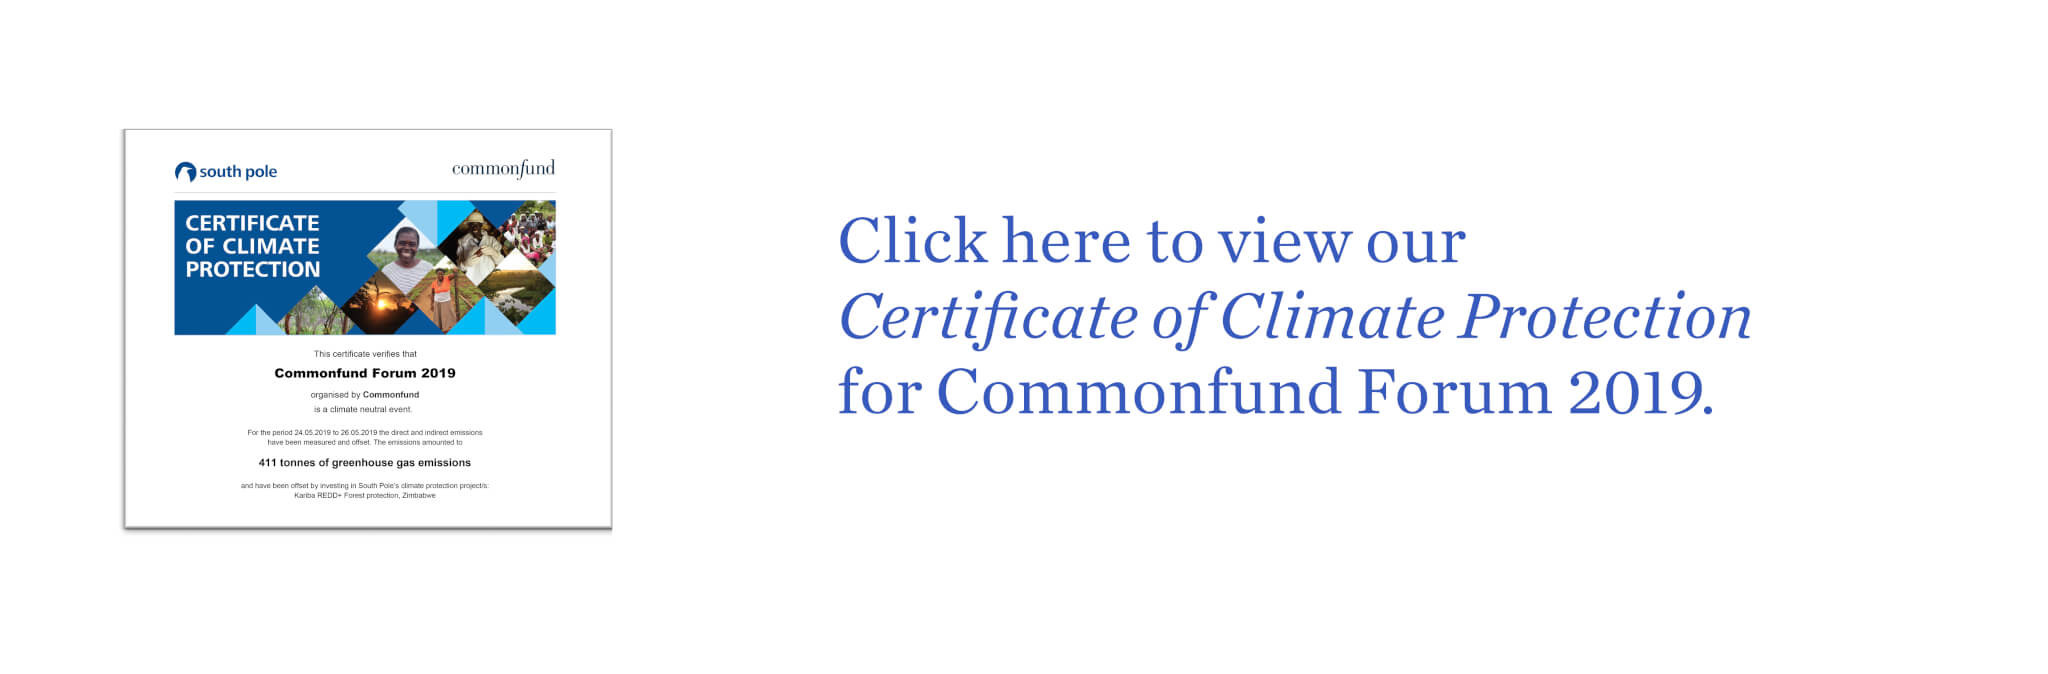 Click here to view our Certificate of Climate Protection.